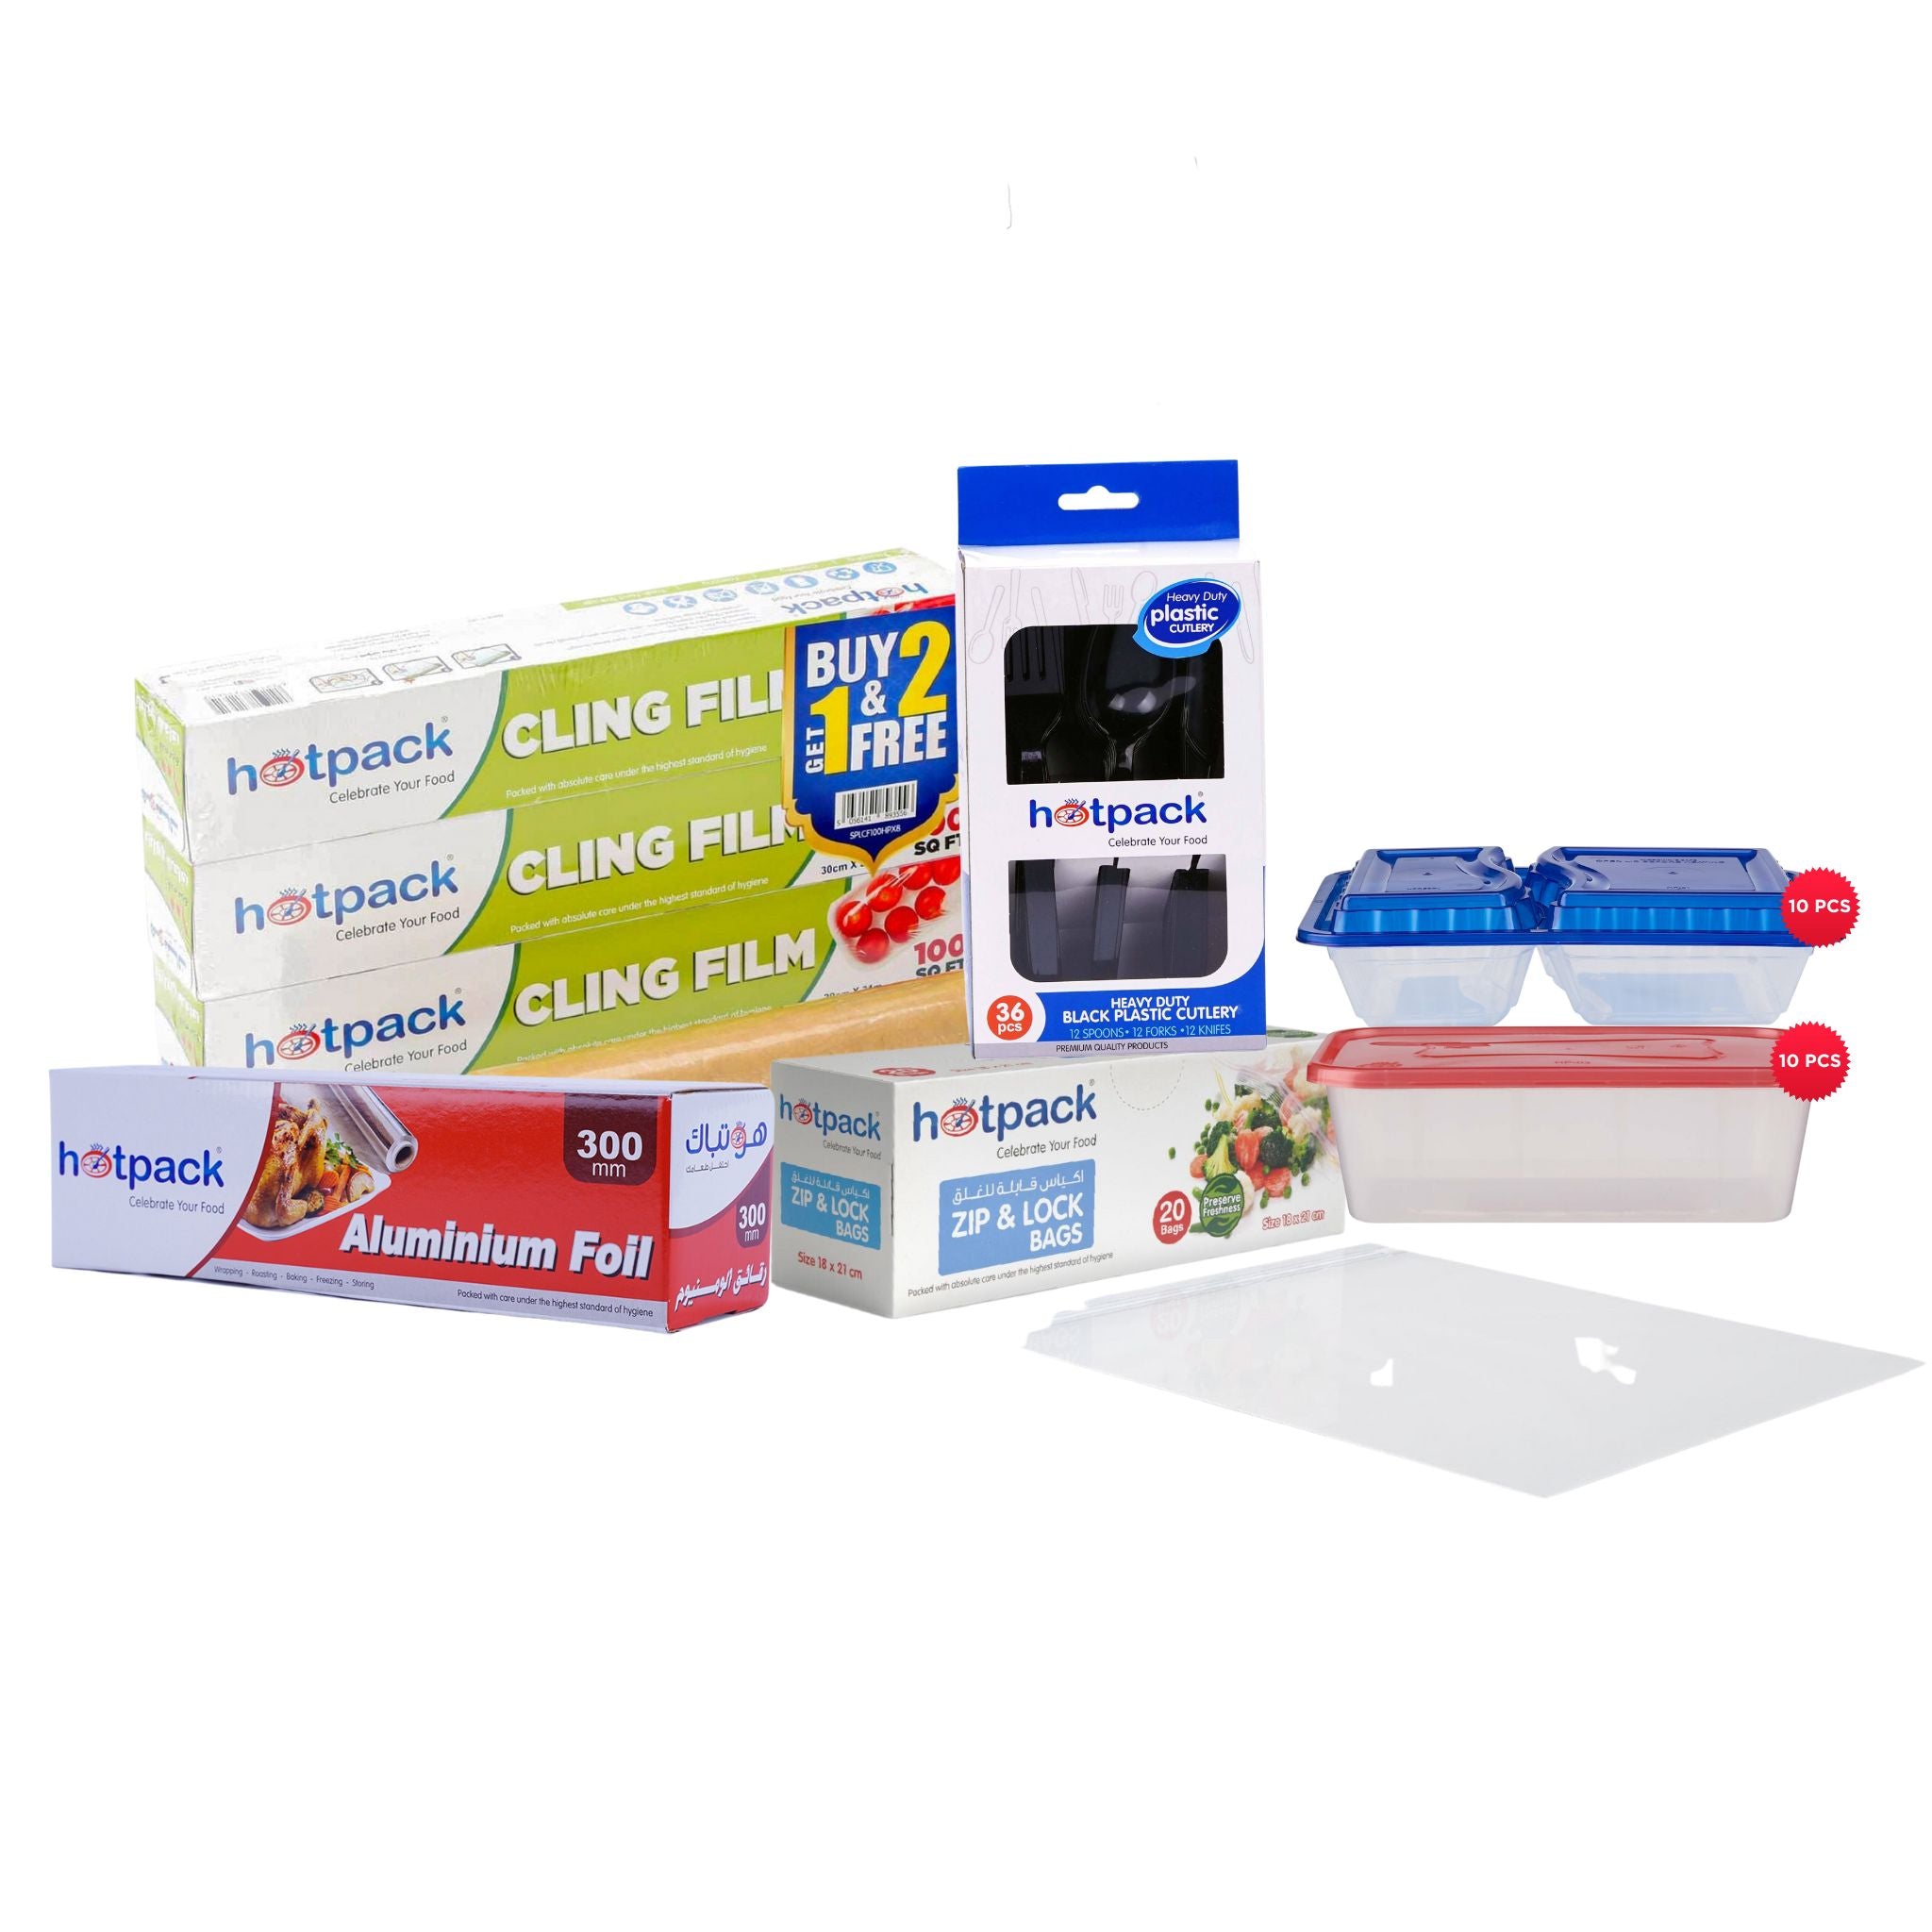 Back to School Combo (Microwave container, Aluminum Foil, Cling film, Cutlery Set, Zip lock Bag)